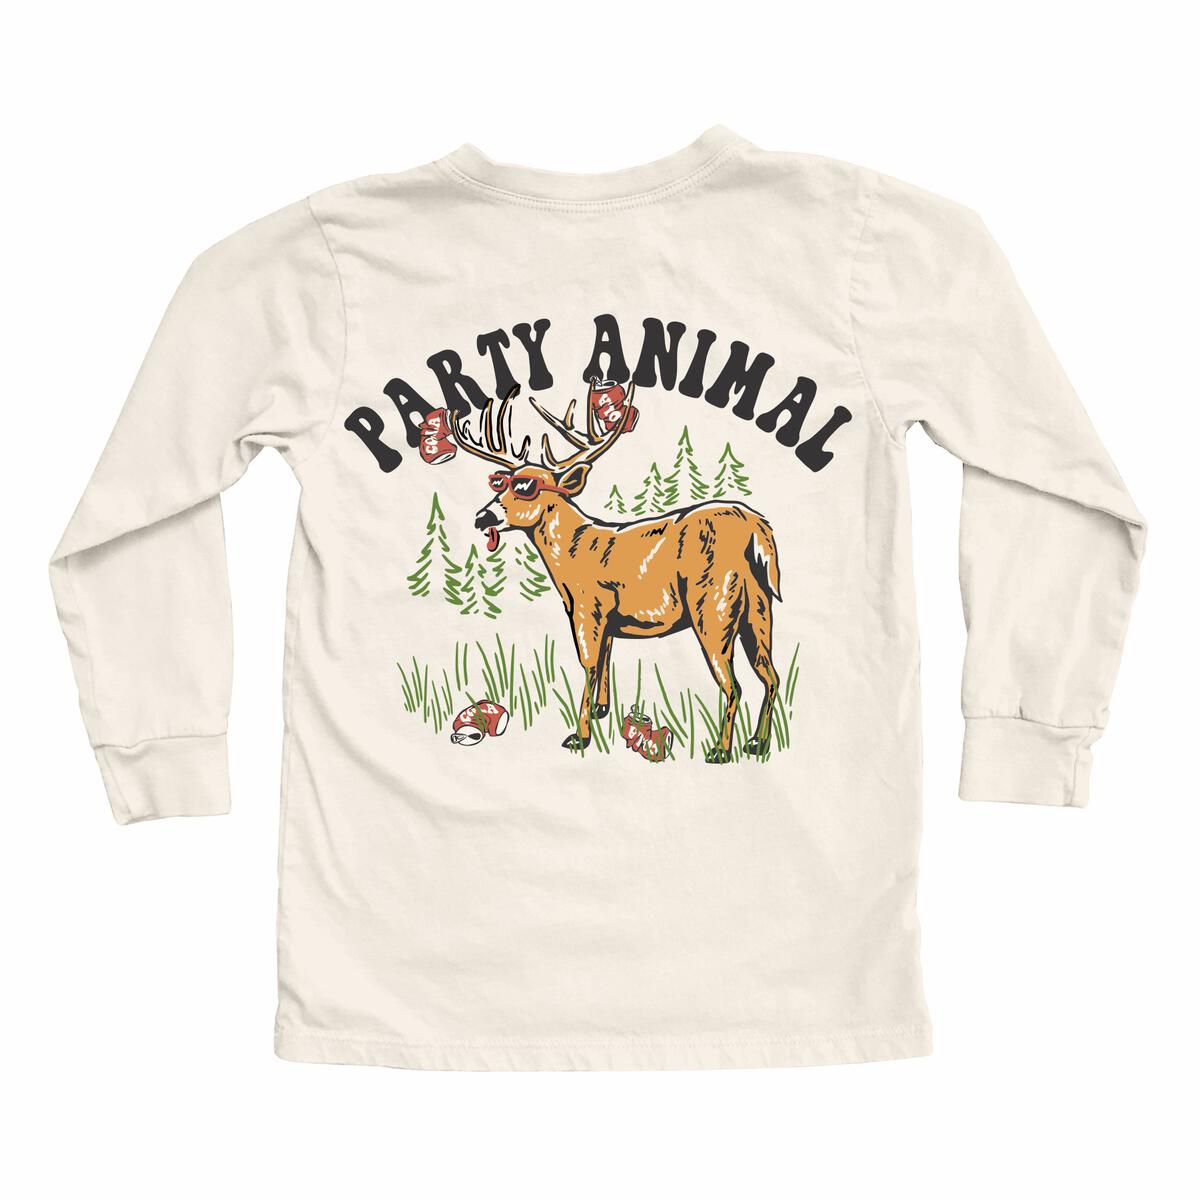 Tiny Whales Party Animal Long Sleeve T-Shirt - Twinkle Twinkle Little One